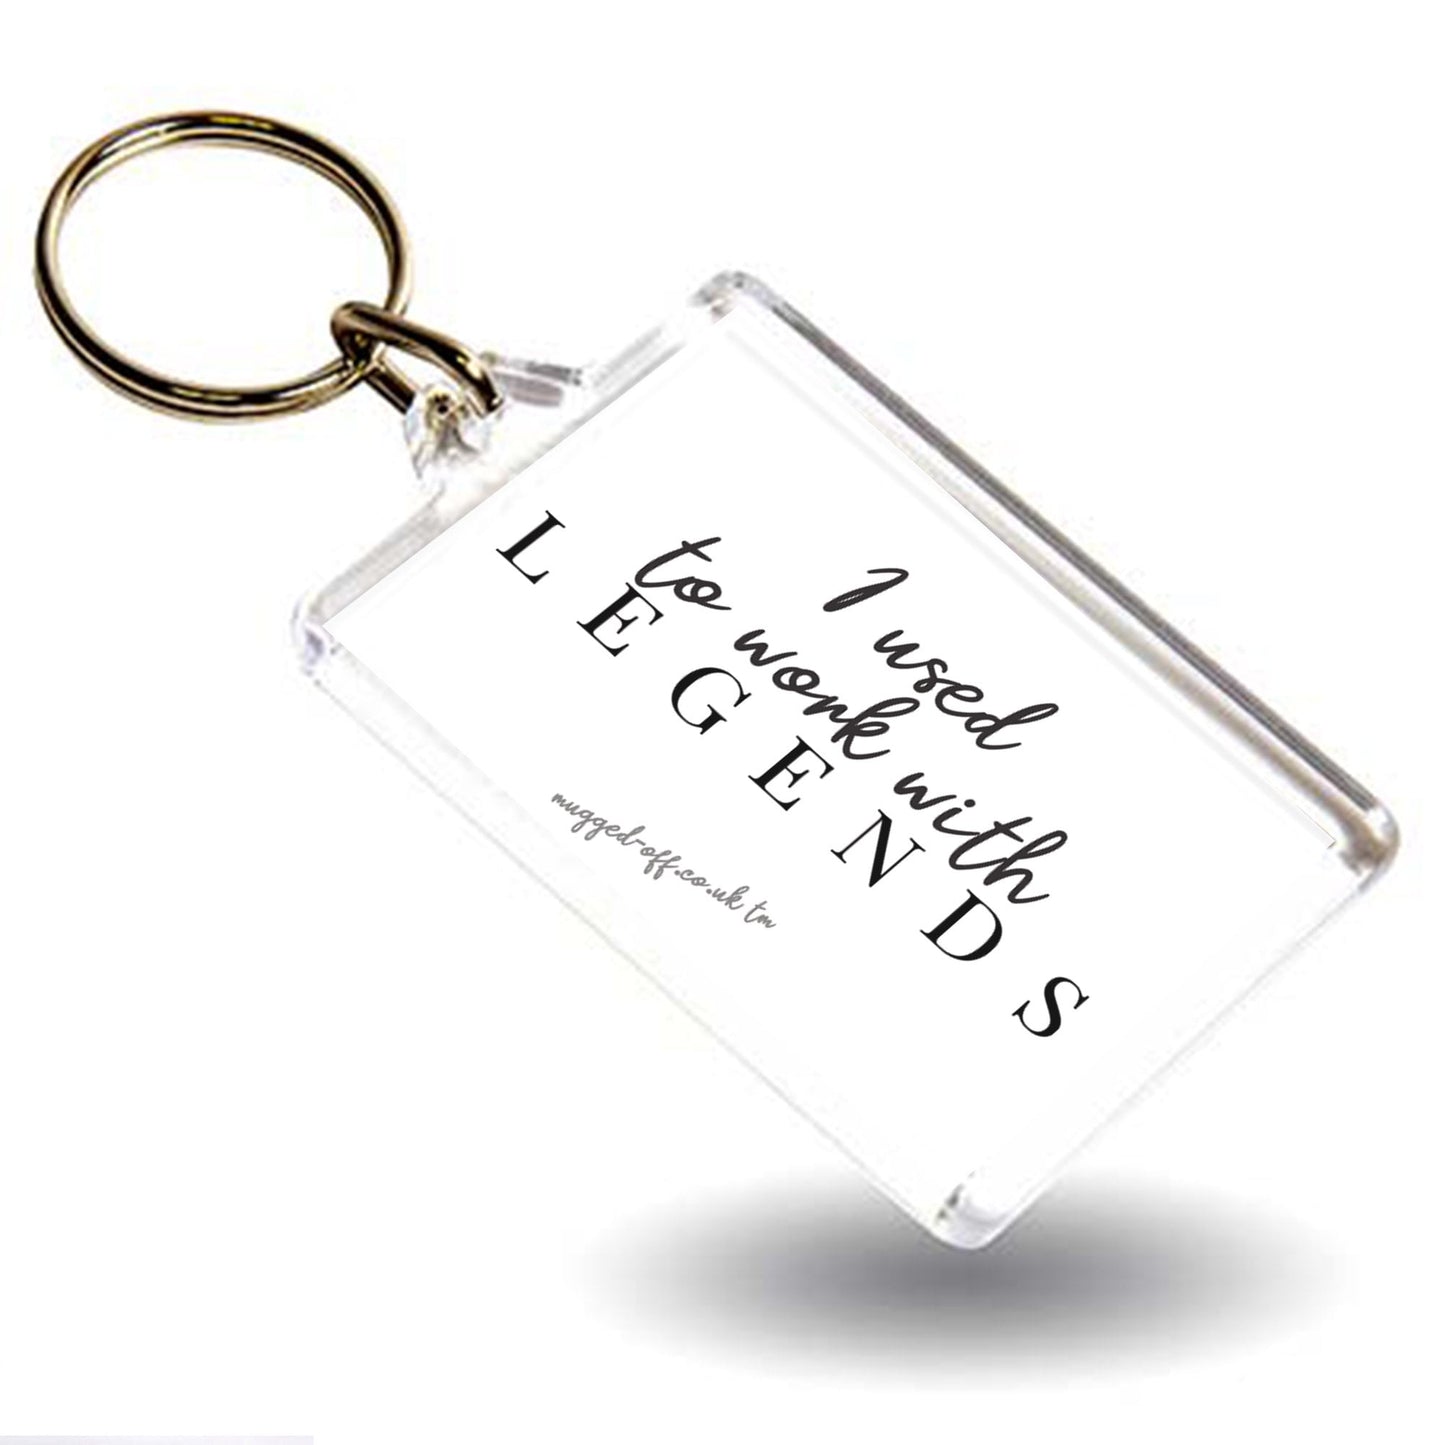 Leaving Keyring I used to work with Legends Colleague New Job Present Office For Him For Her Work Leaving farewell keychain